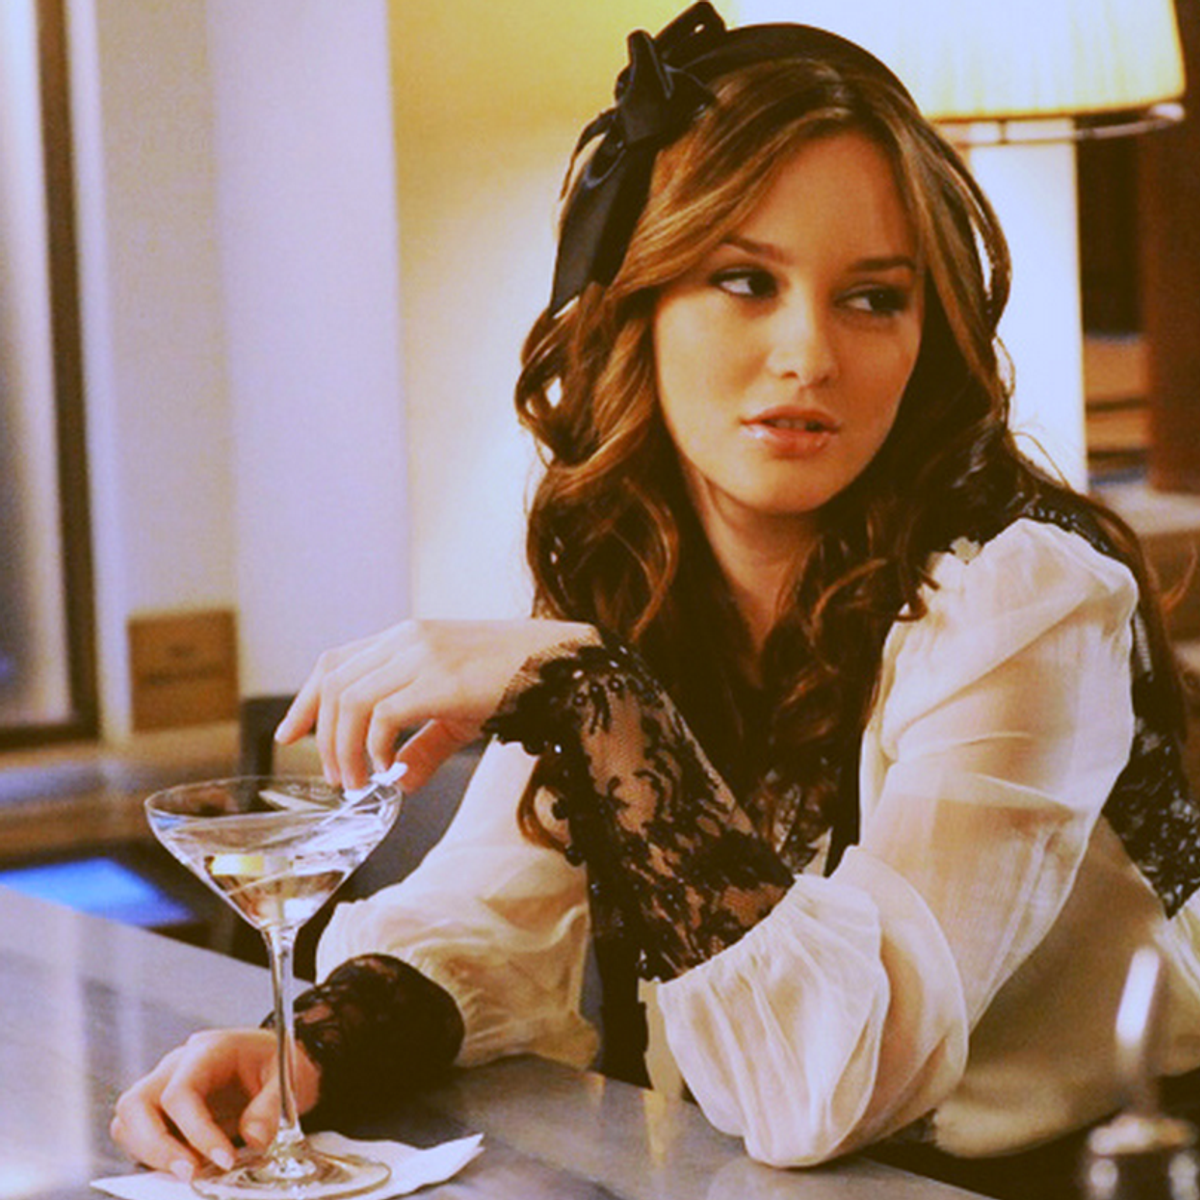 When Blair Waldorf Was A Voice Of Reason That You Just Needed To Hear